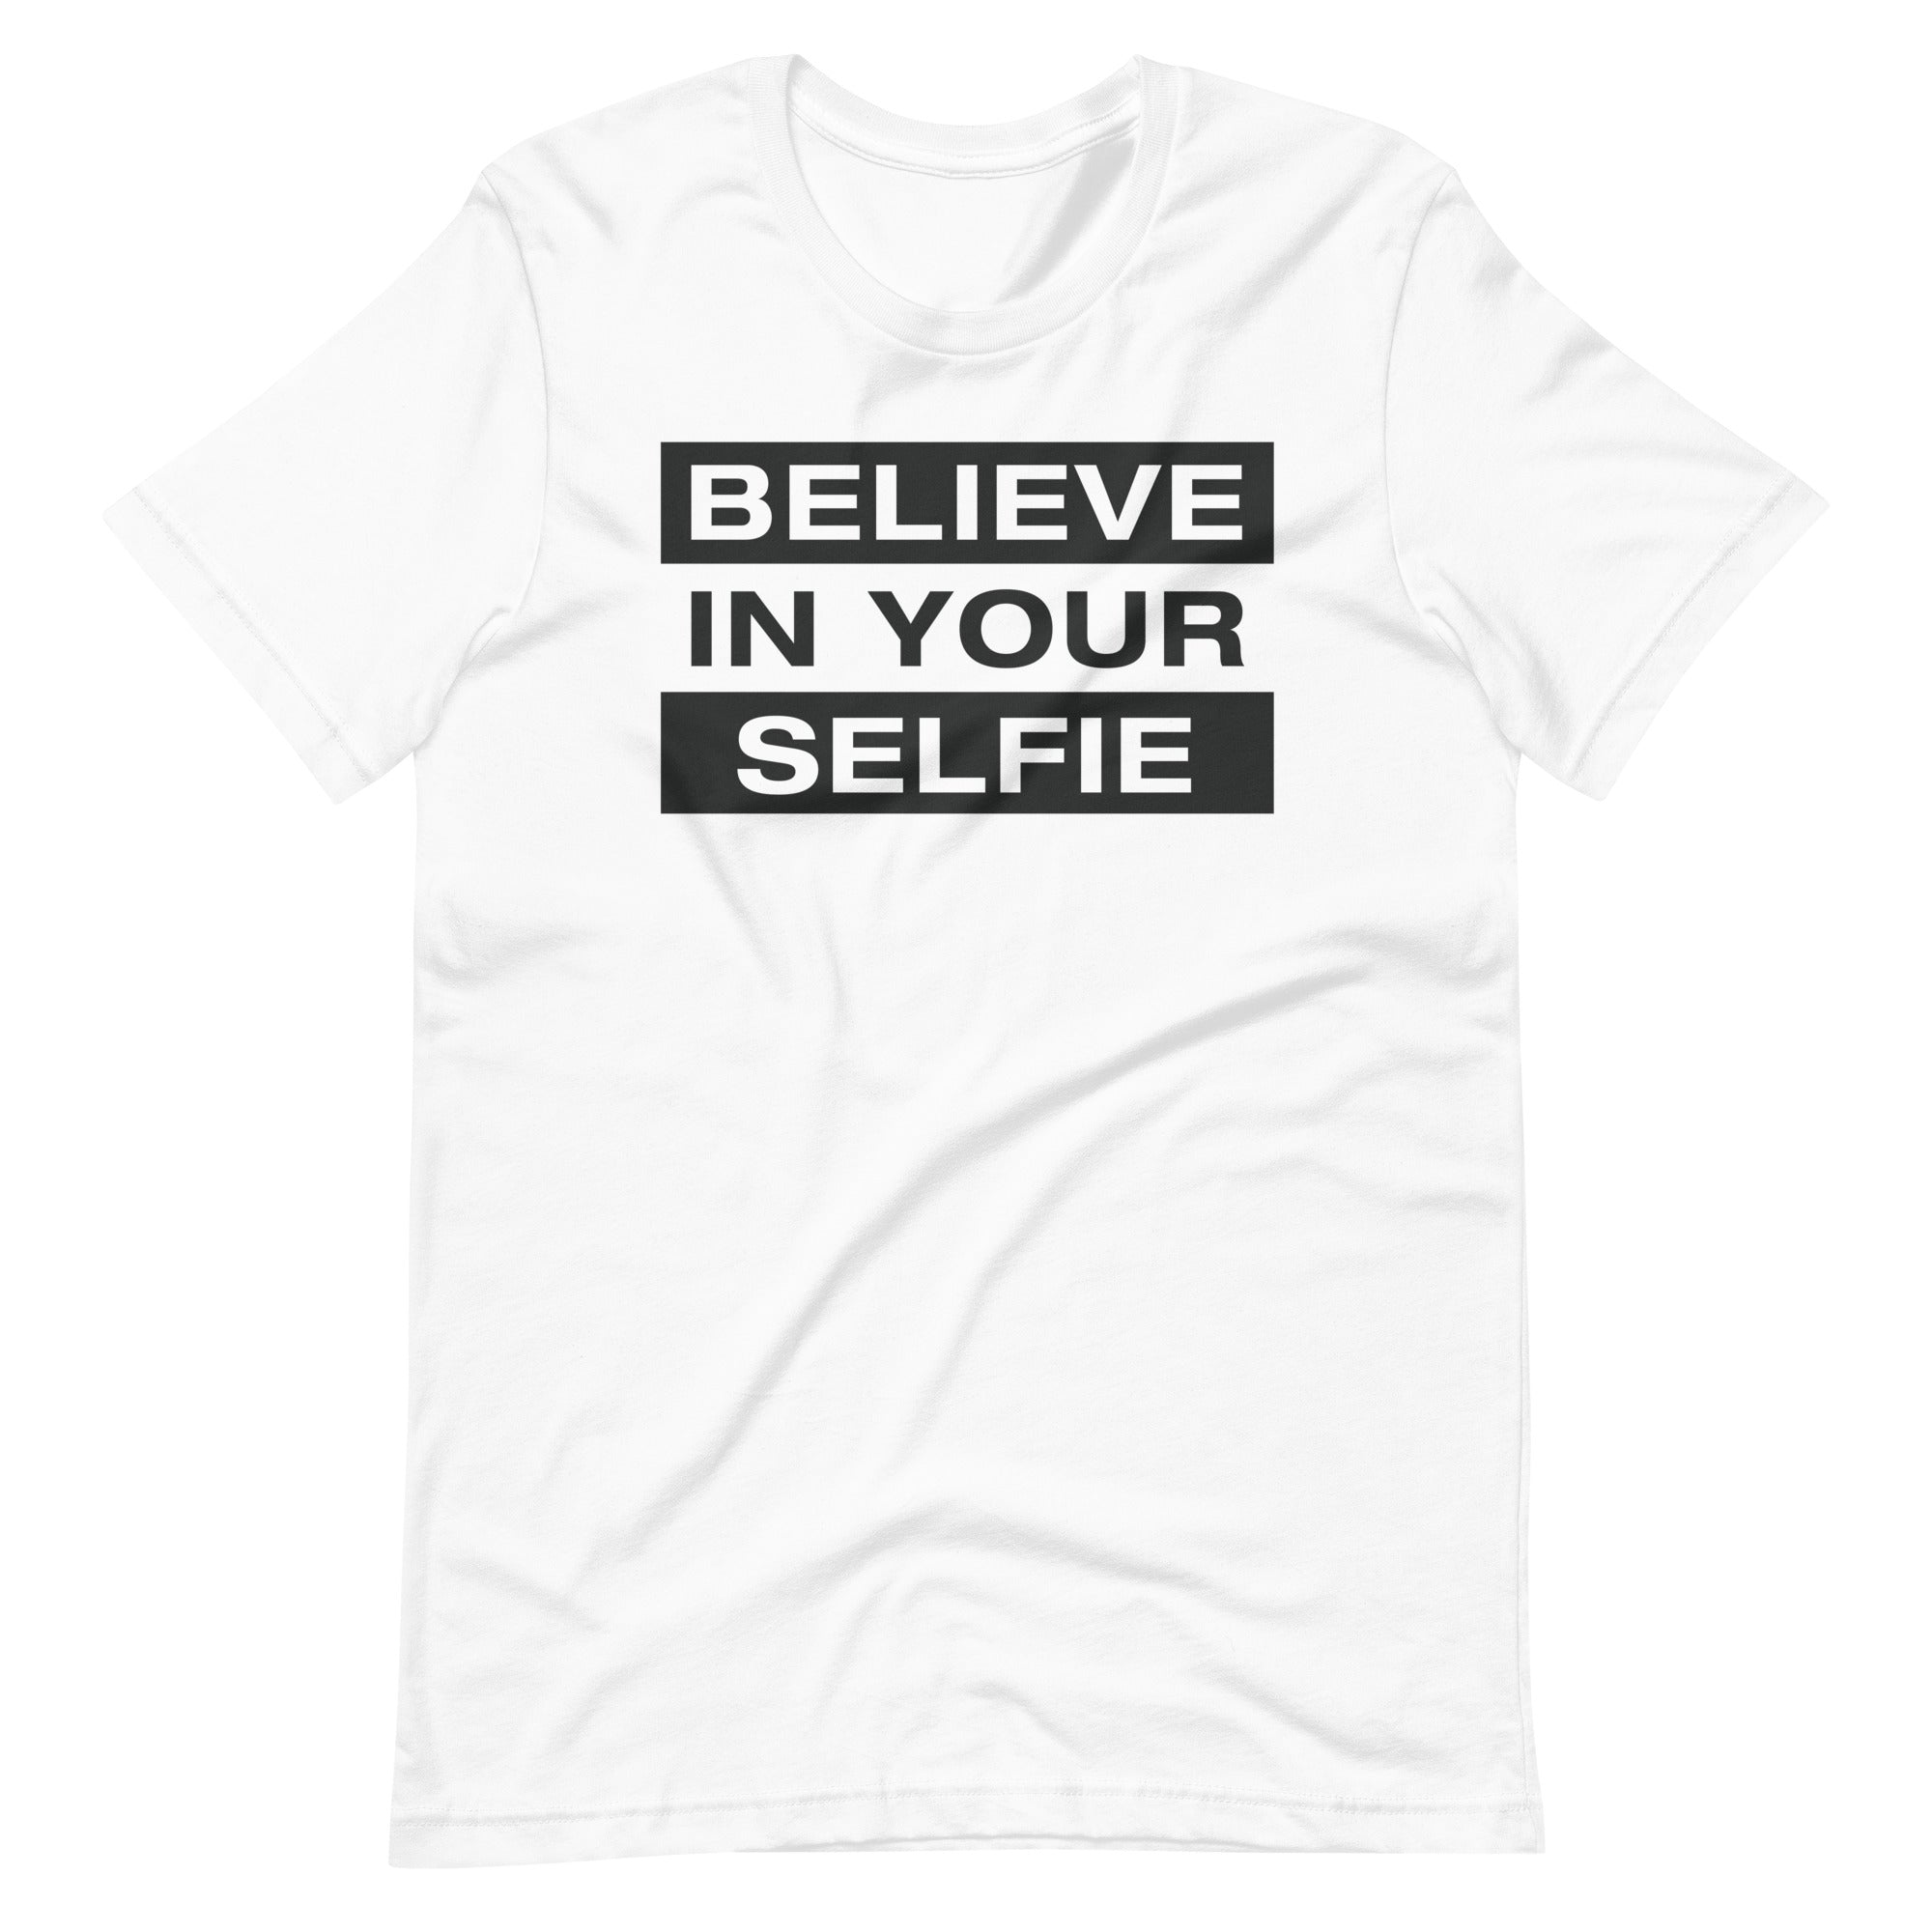 Mike Sorrentino Believe in Your Selfie Shirt